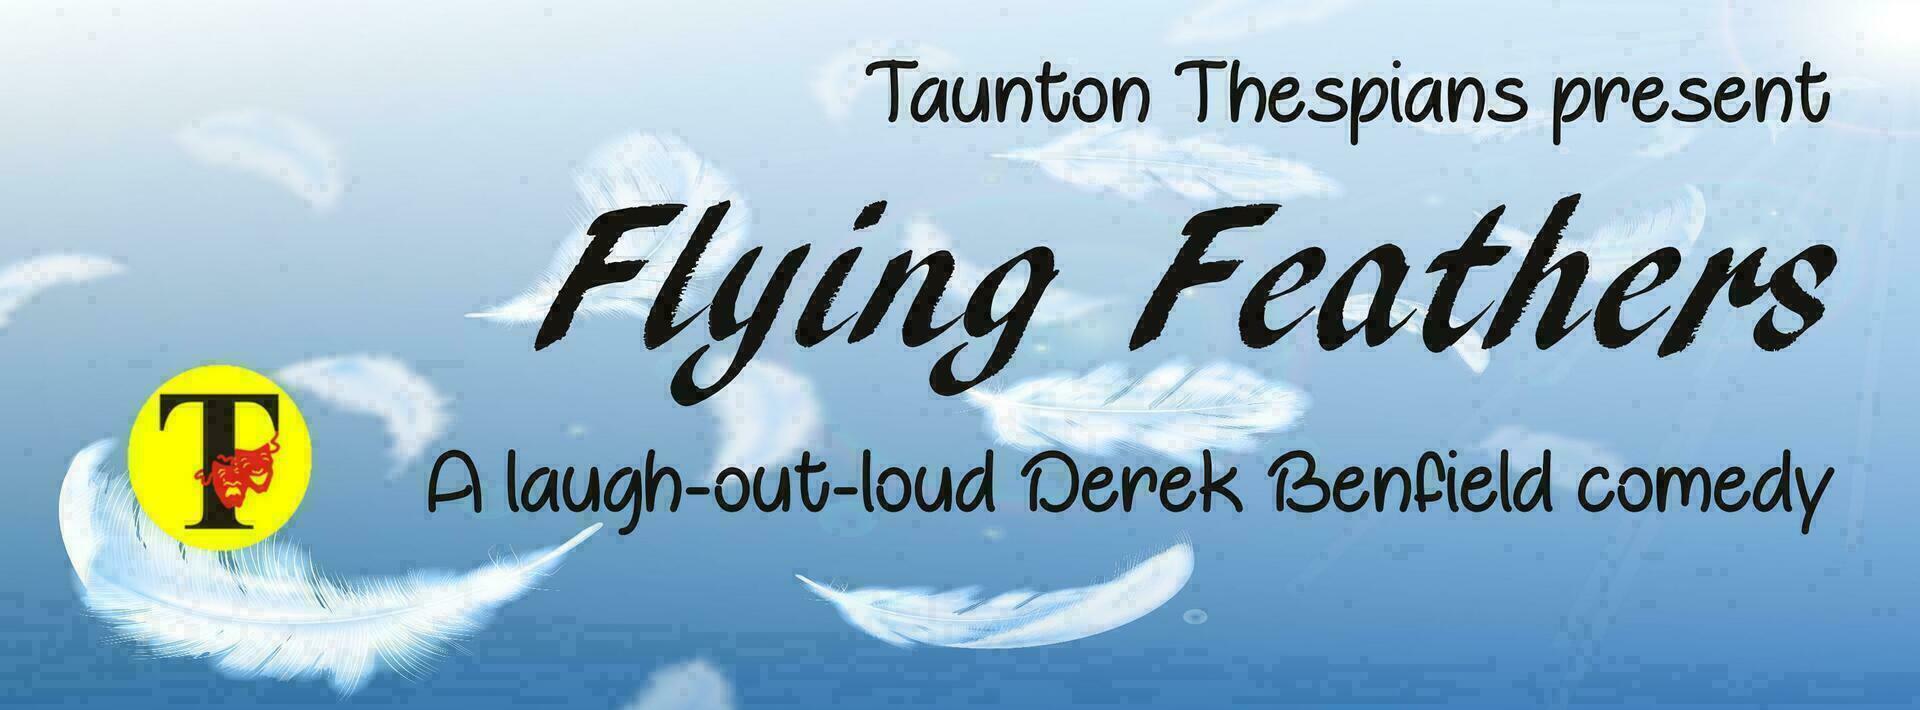 Taunton Thespians present Derek Benfield's laugh out loud comedy "Flying Feathers", Taunton, England, United Kingdom